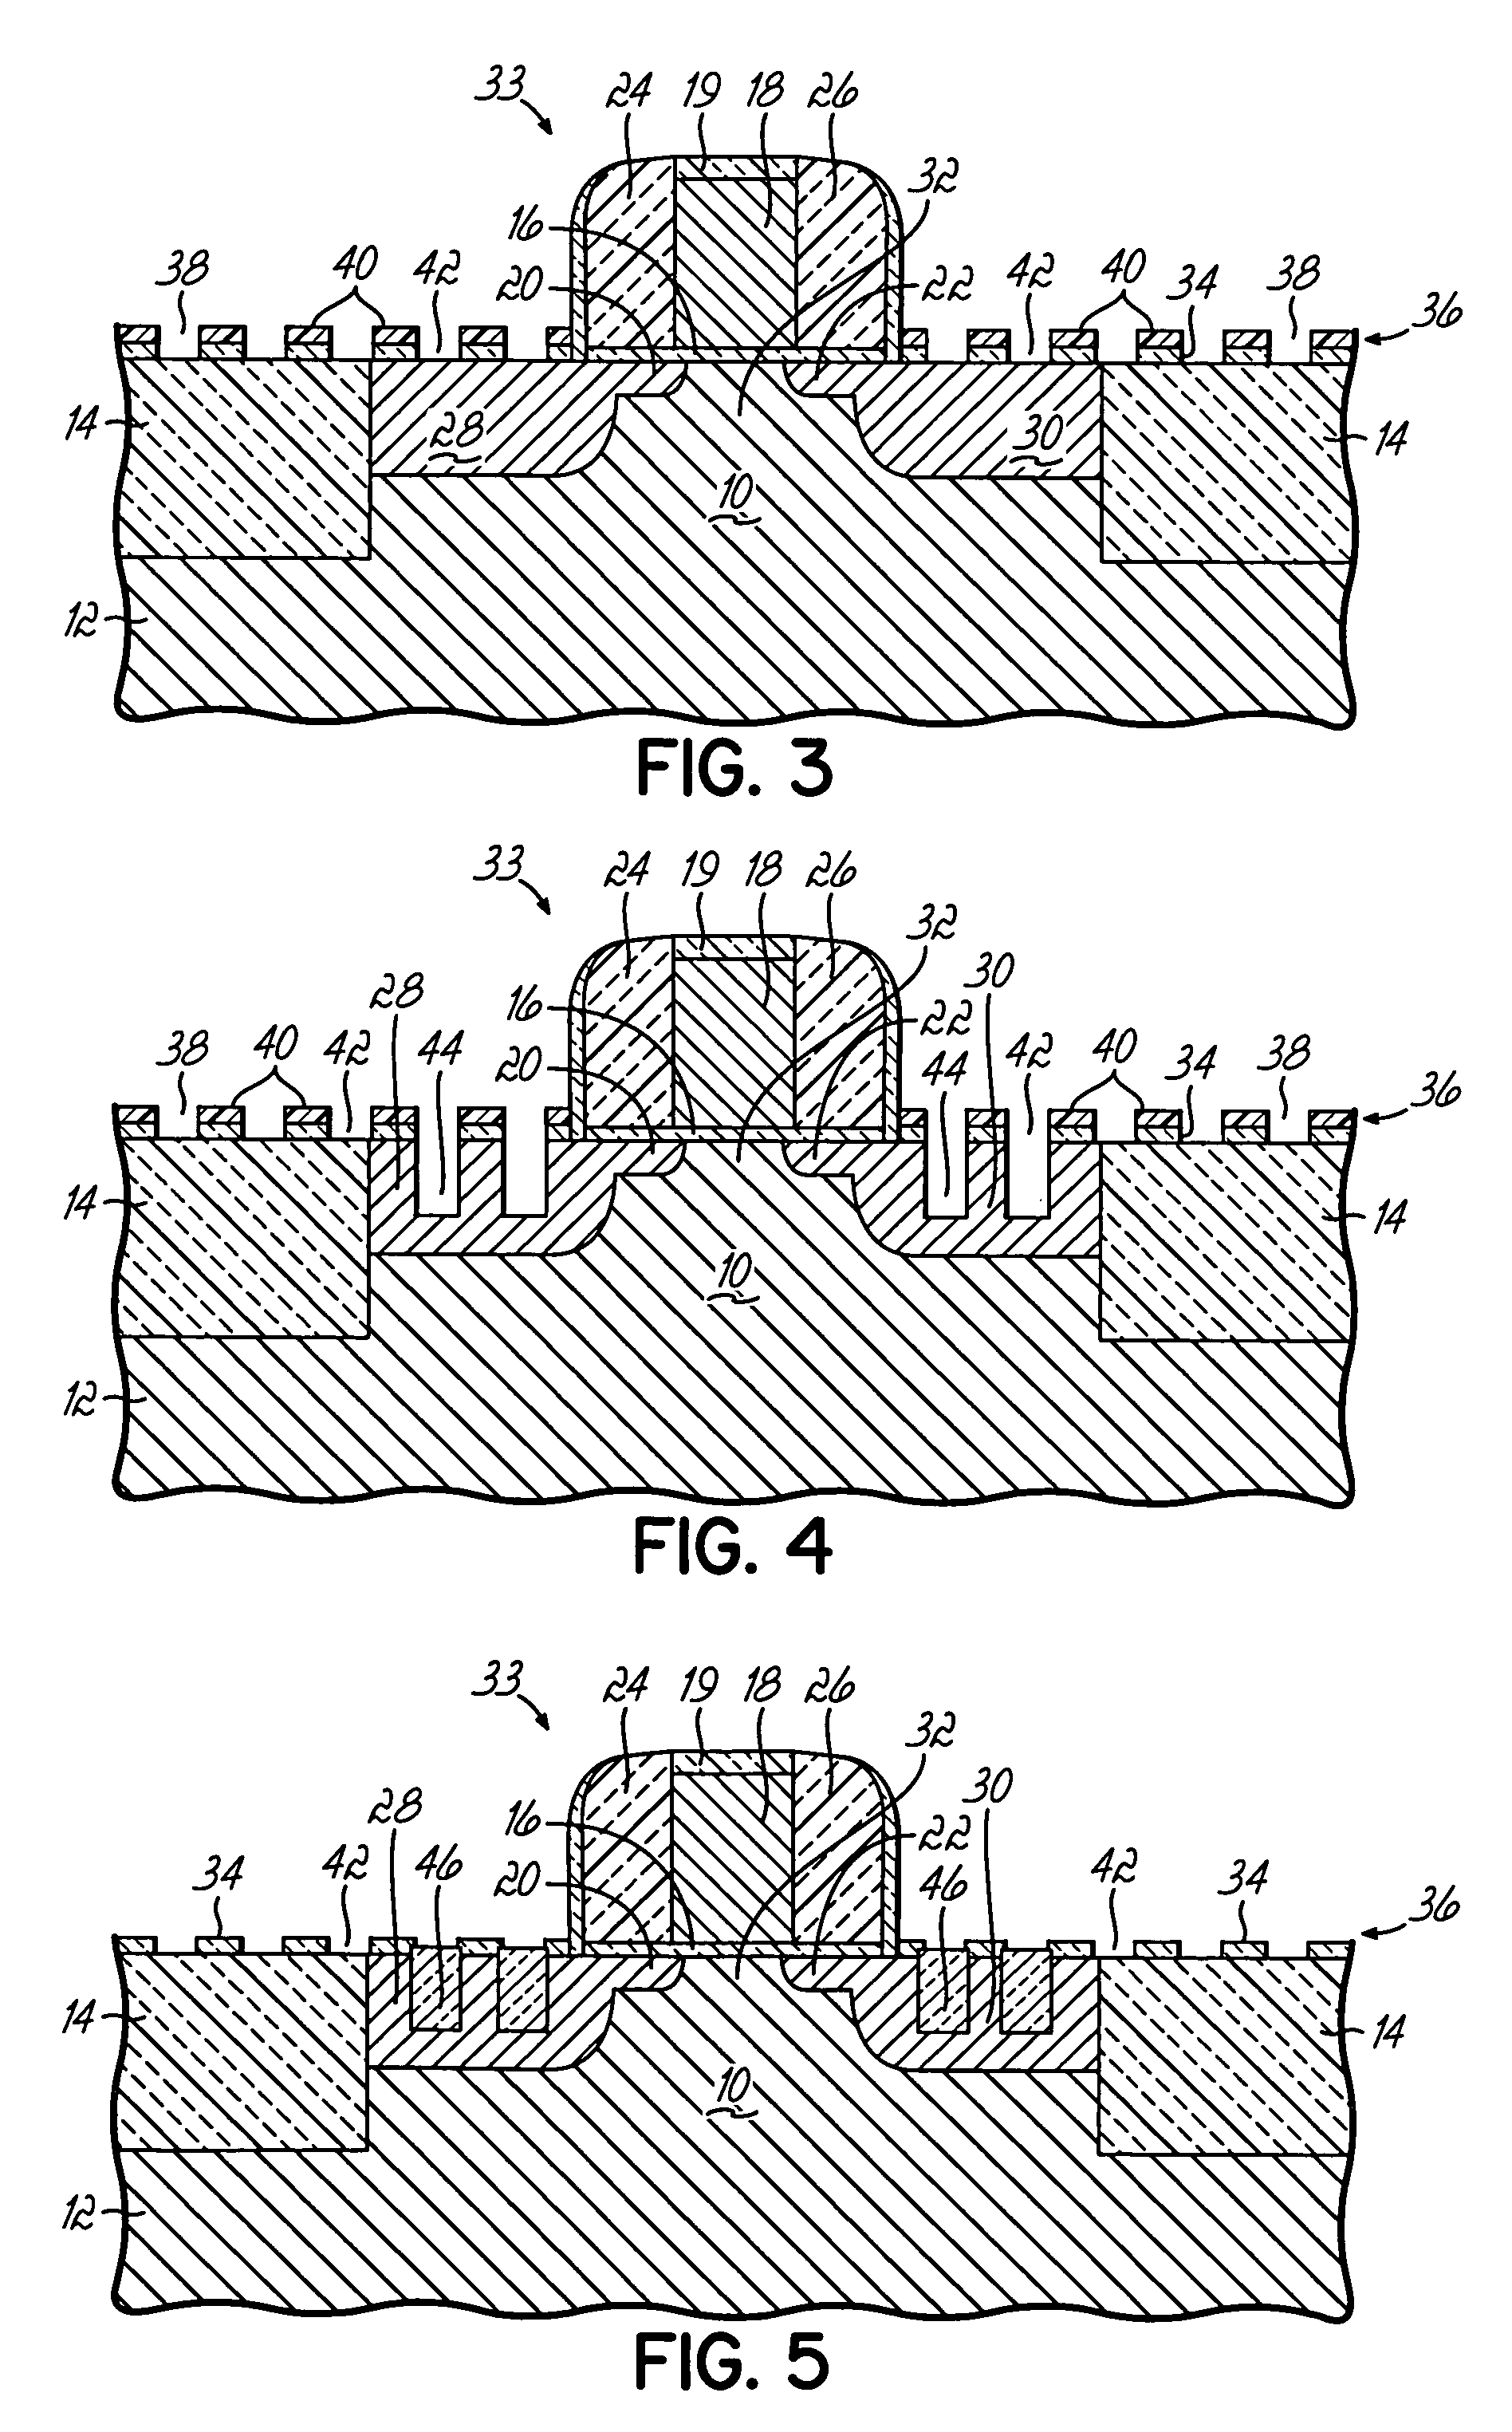 Strained semiconductor device structures